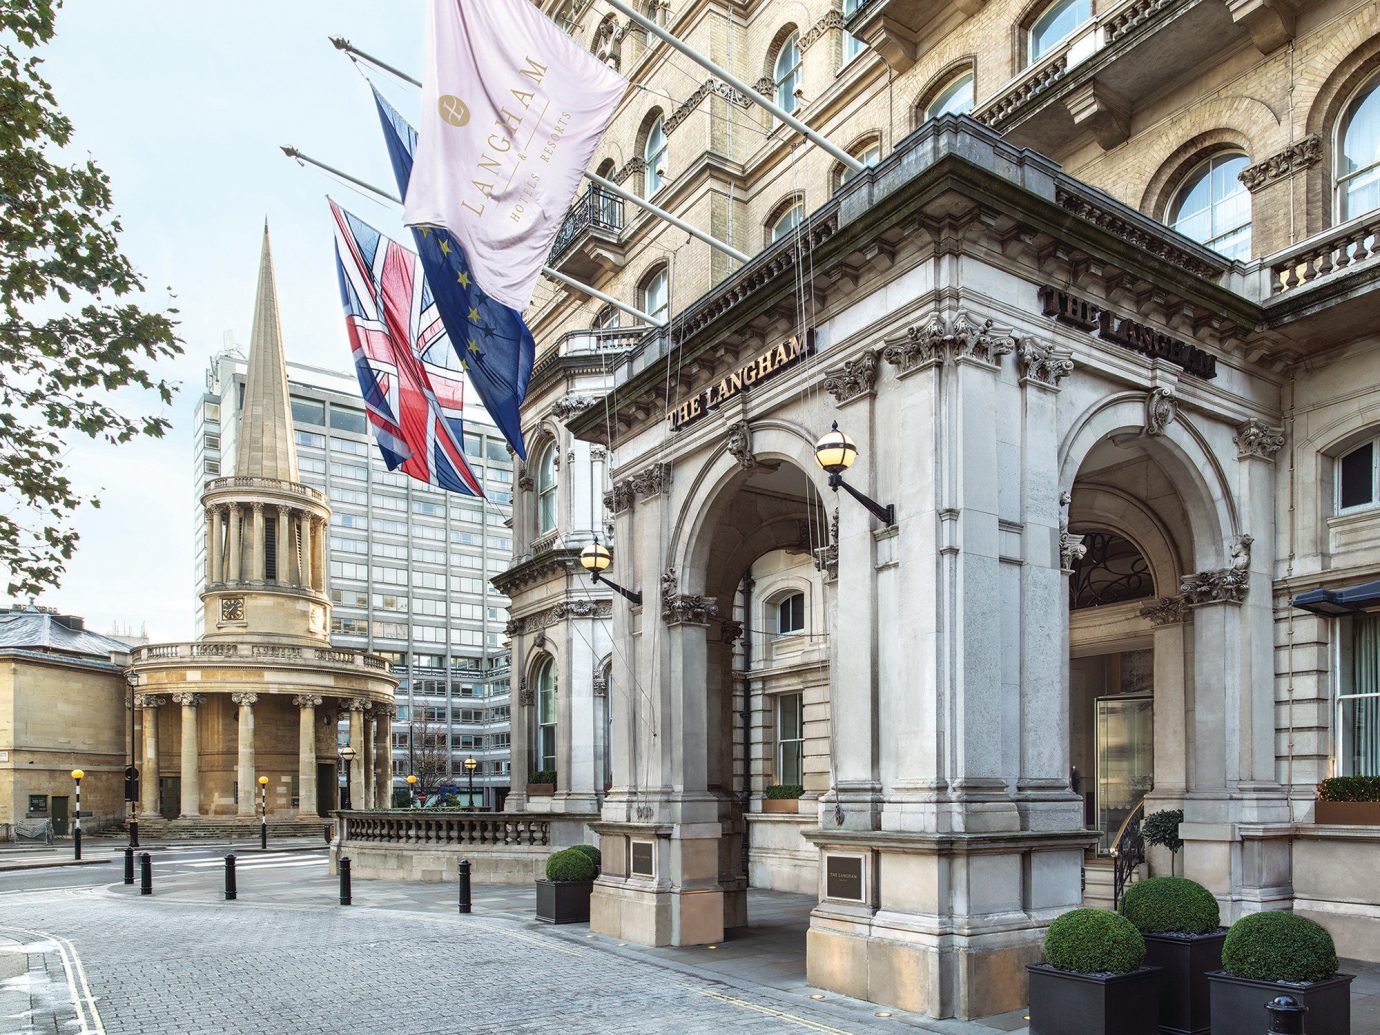 Hotels London Luxury Travel building outdoor landmark classical architecture arch palace facade metropolitan area statue metropolis City window mansion medieval architecture stone